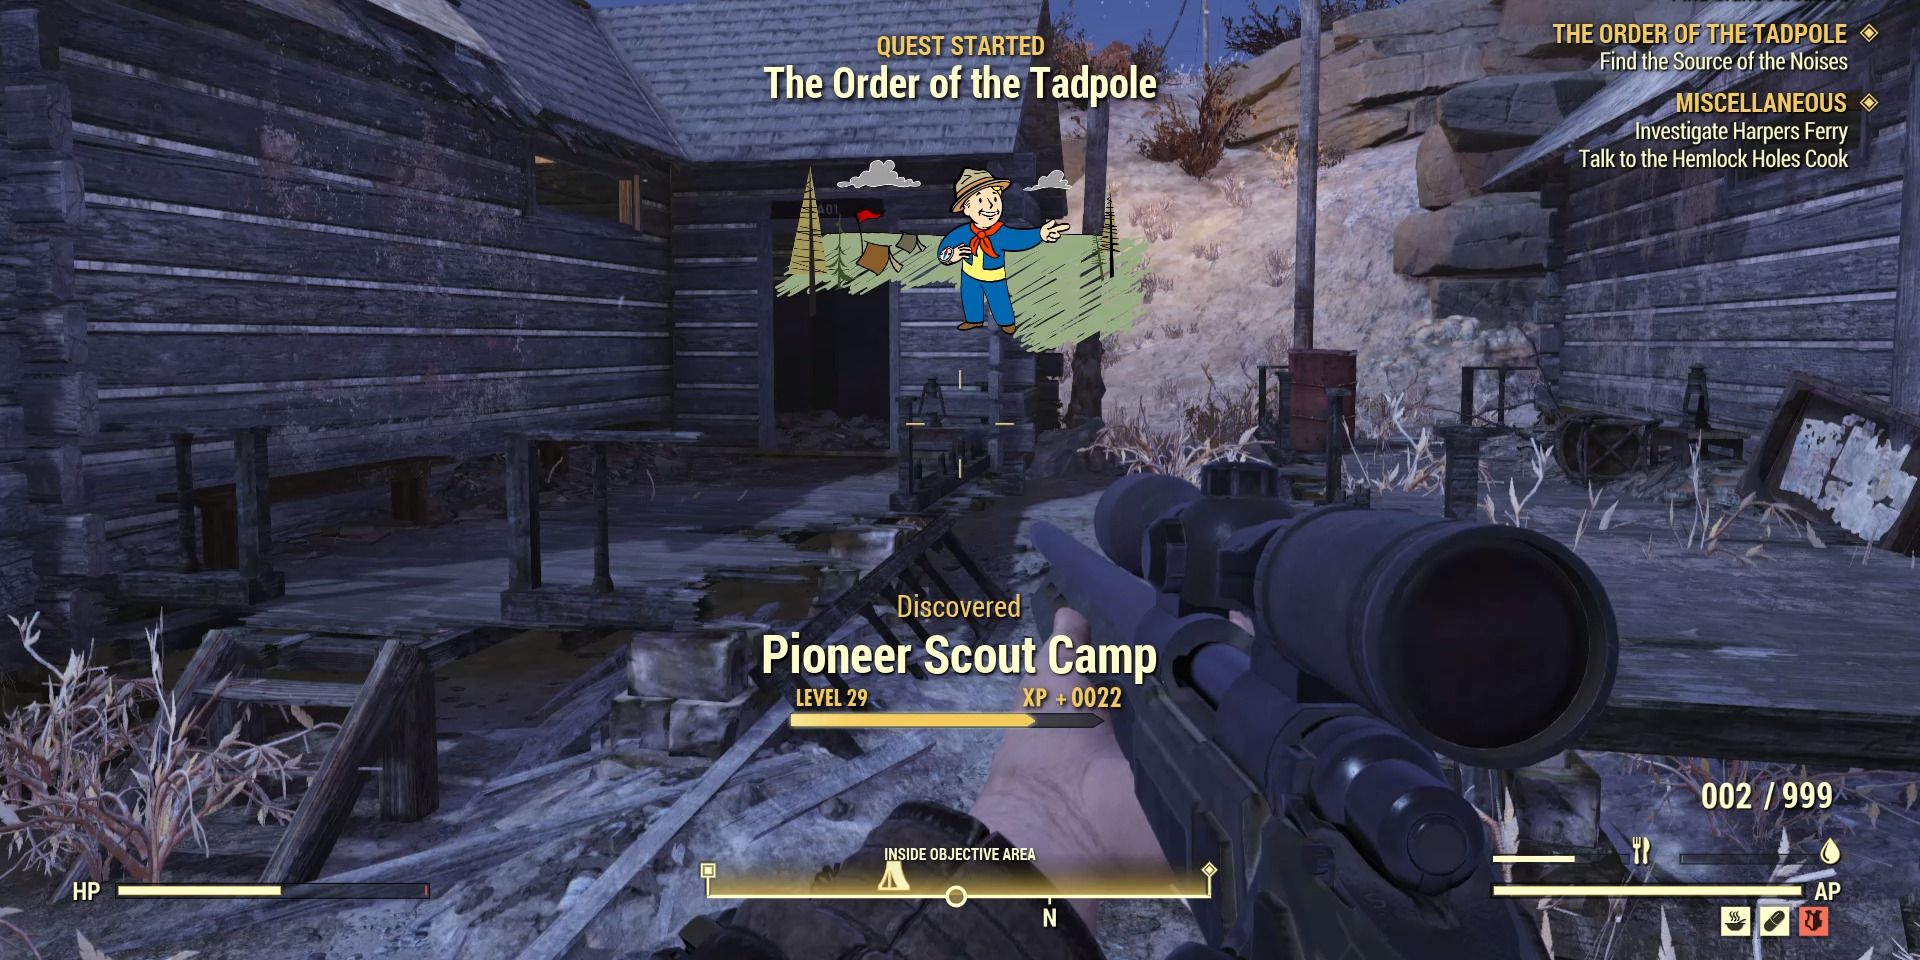 Image of the order of the tadpole quest being unlocked in Fallout 76